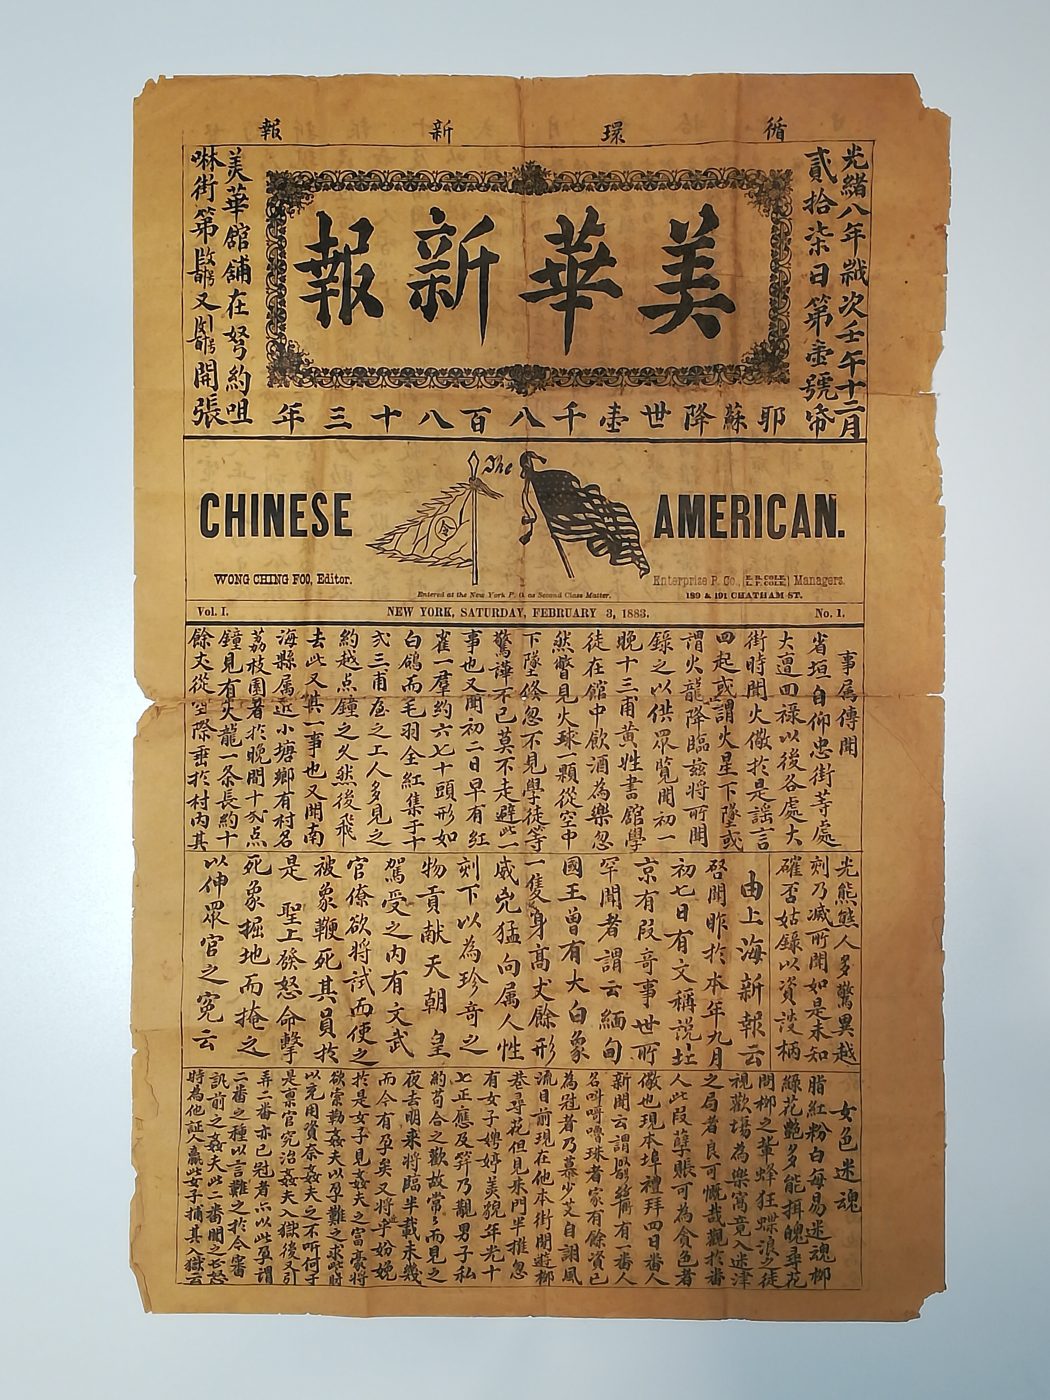 Page 1 of The Chinese American. Courtesy of Gordon C. H. Wang (王家軒). Museum of Chinese in America (MOCA) Collection.